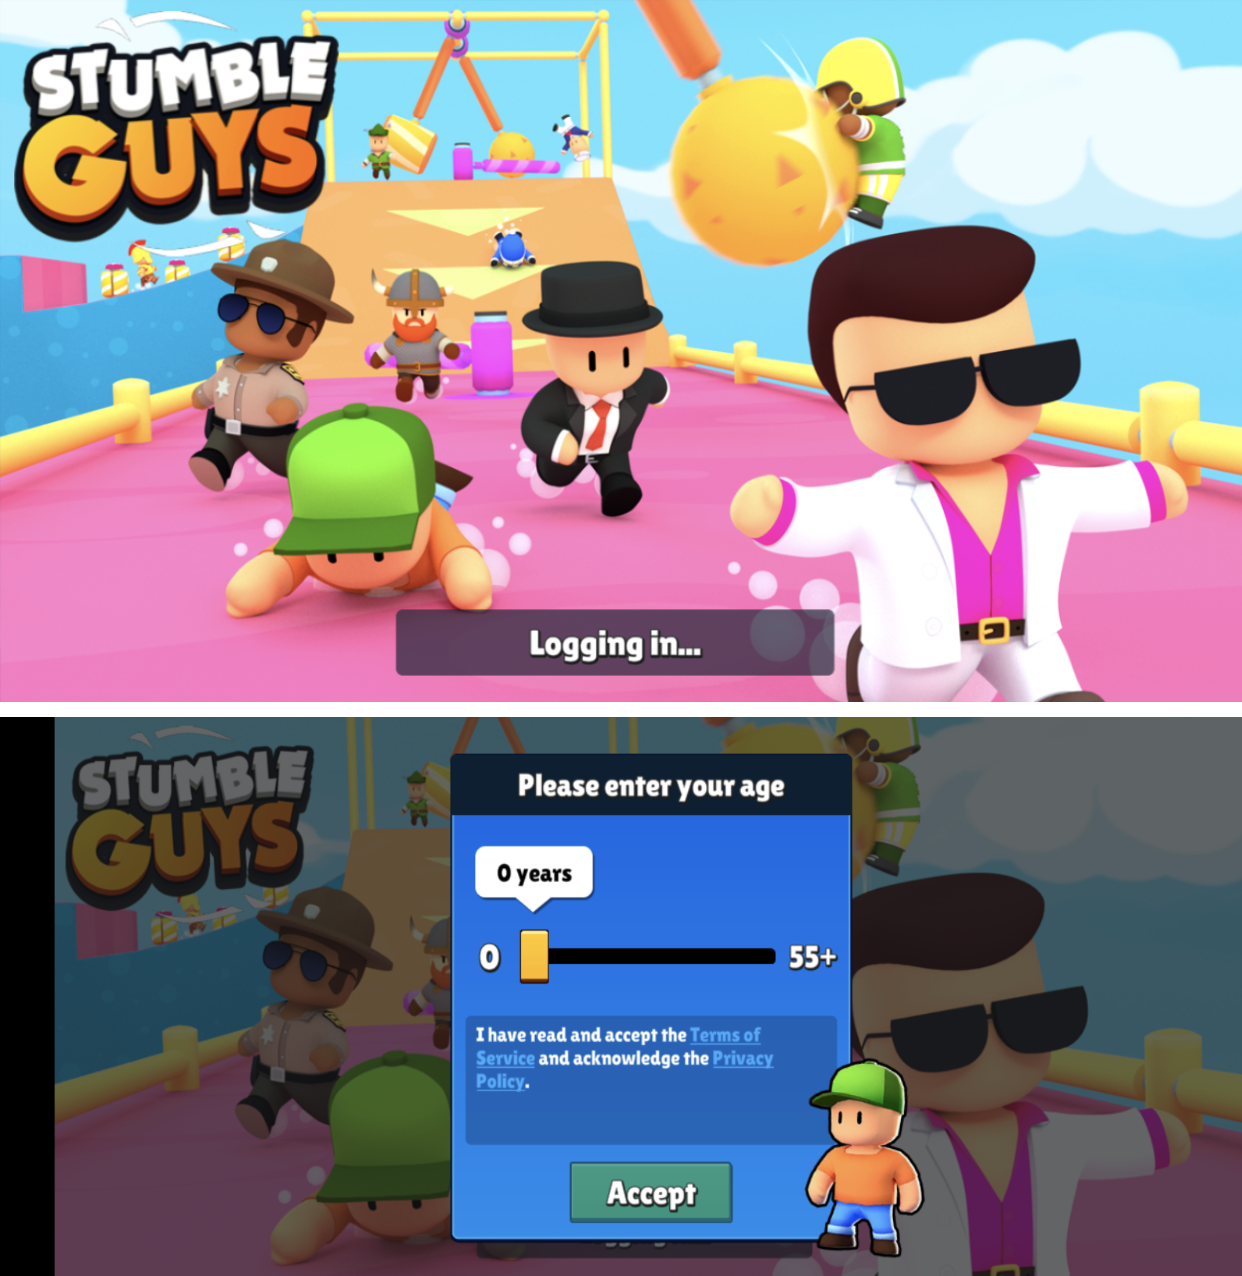 Is Stumble Guys Safe for Kids? Online Game Review for Parents